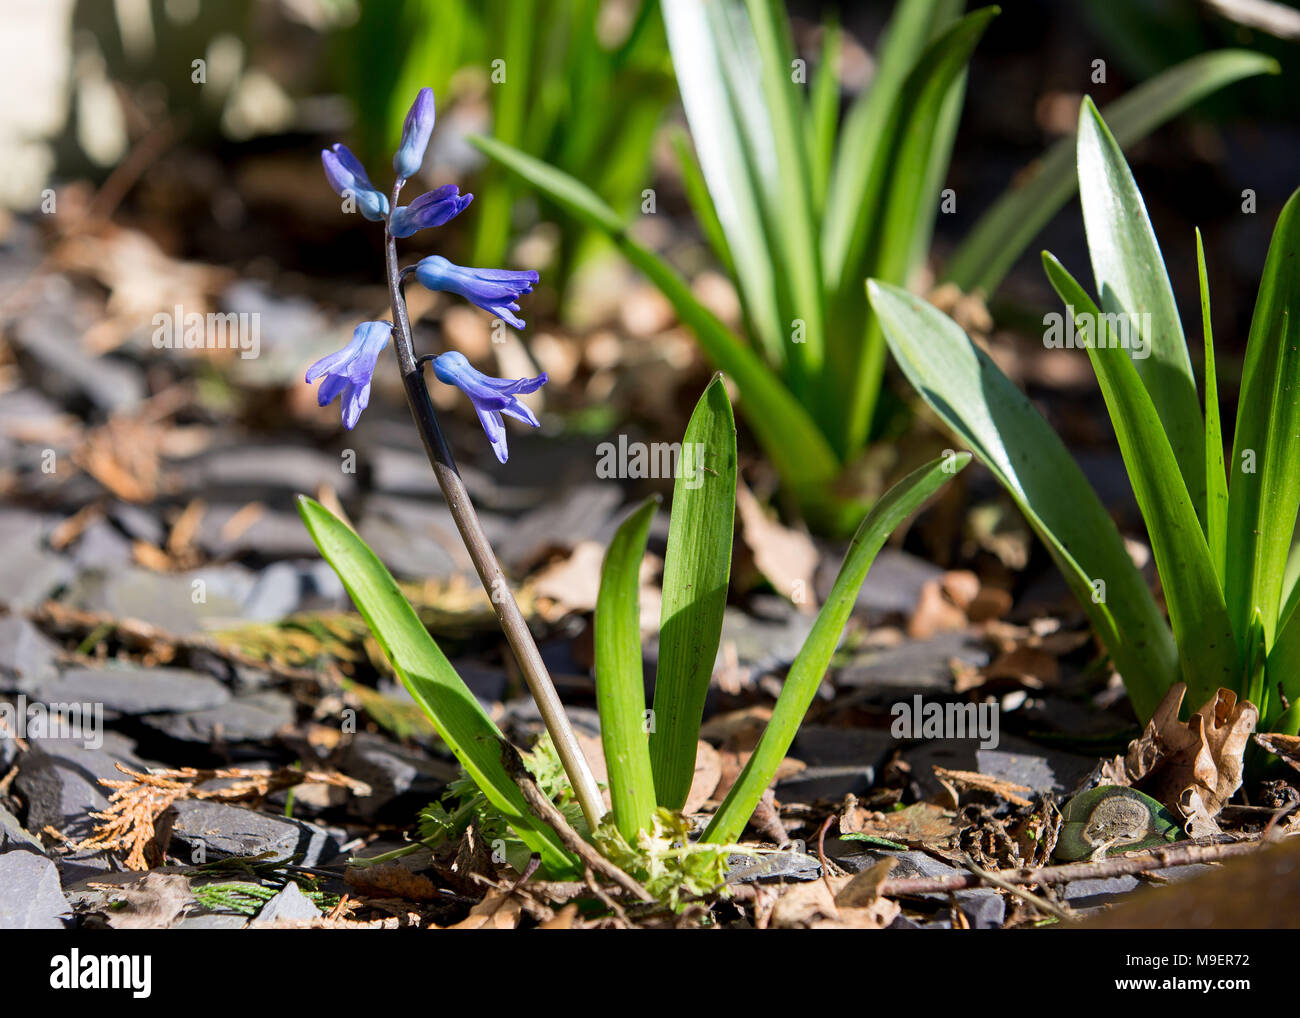 Common Bluebell Hyacinthoides non-scripta. A common bluebell flowering in a garden during spring in the UK Stock Photo